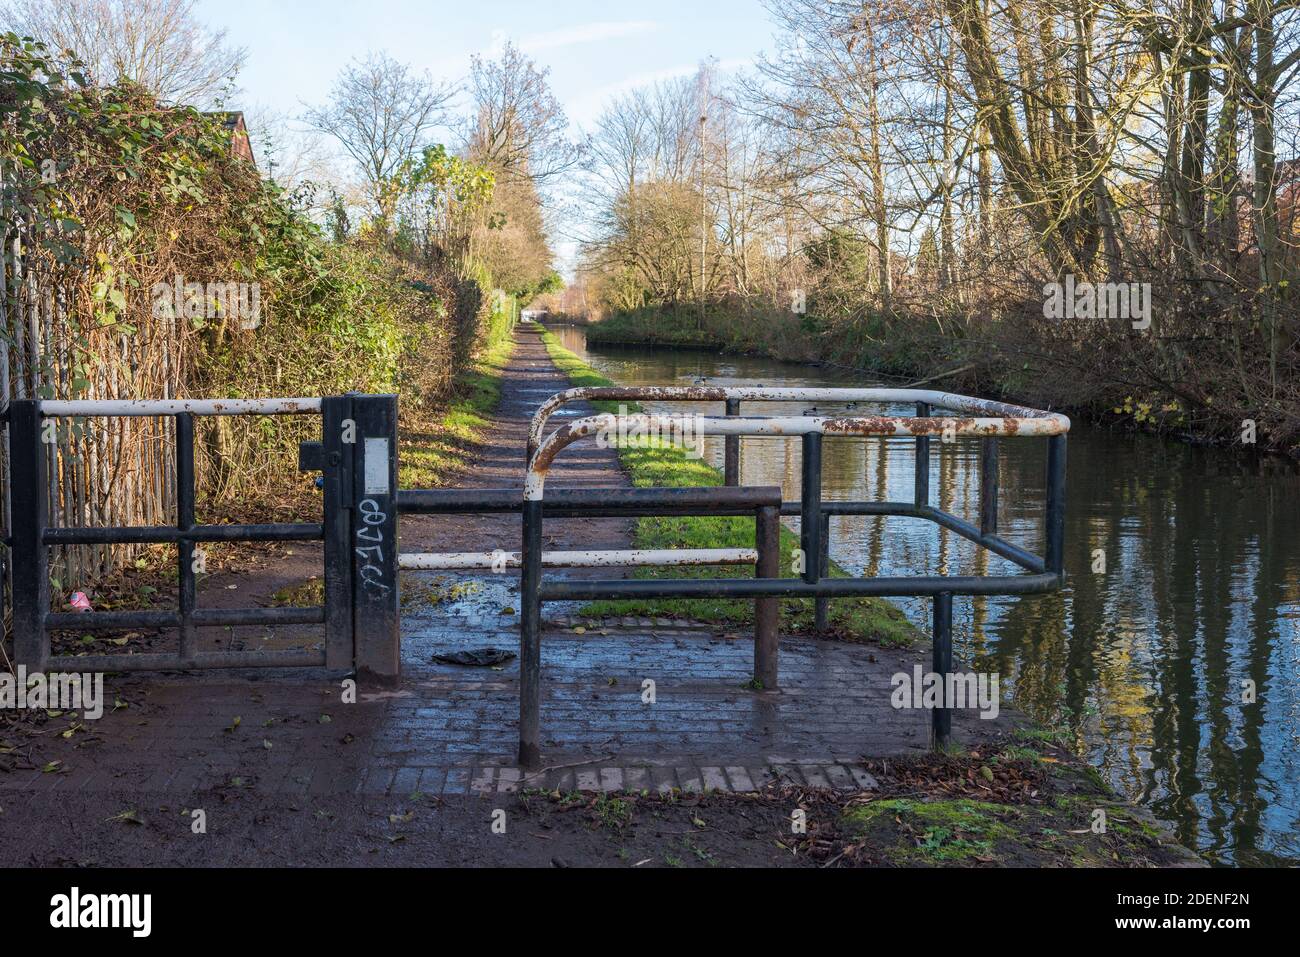 MCB or Motor Cycle Barrier on a canal towpath to prevent motor cycles being ridden along canal towpaths Stock Photo